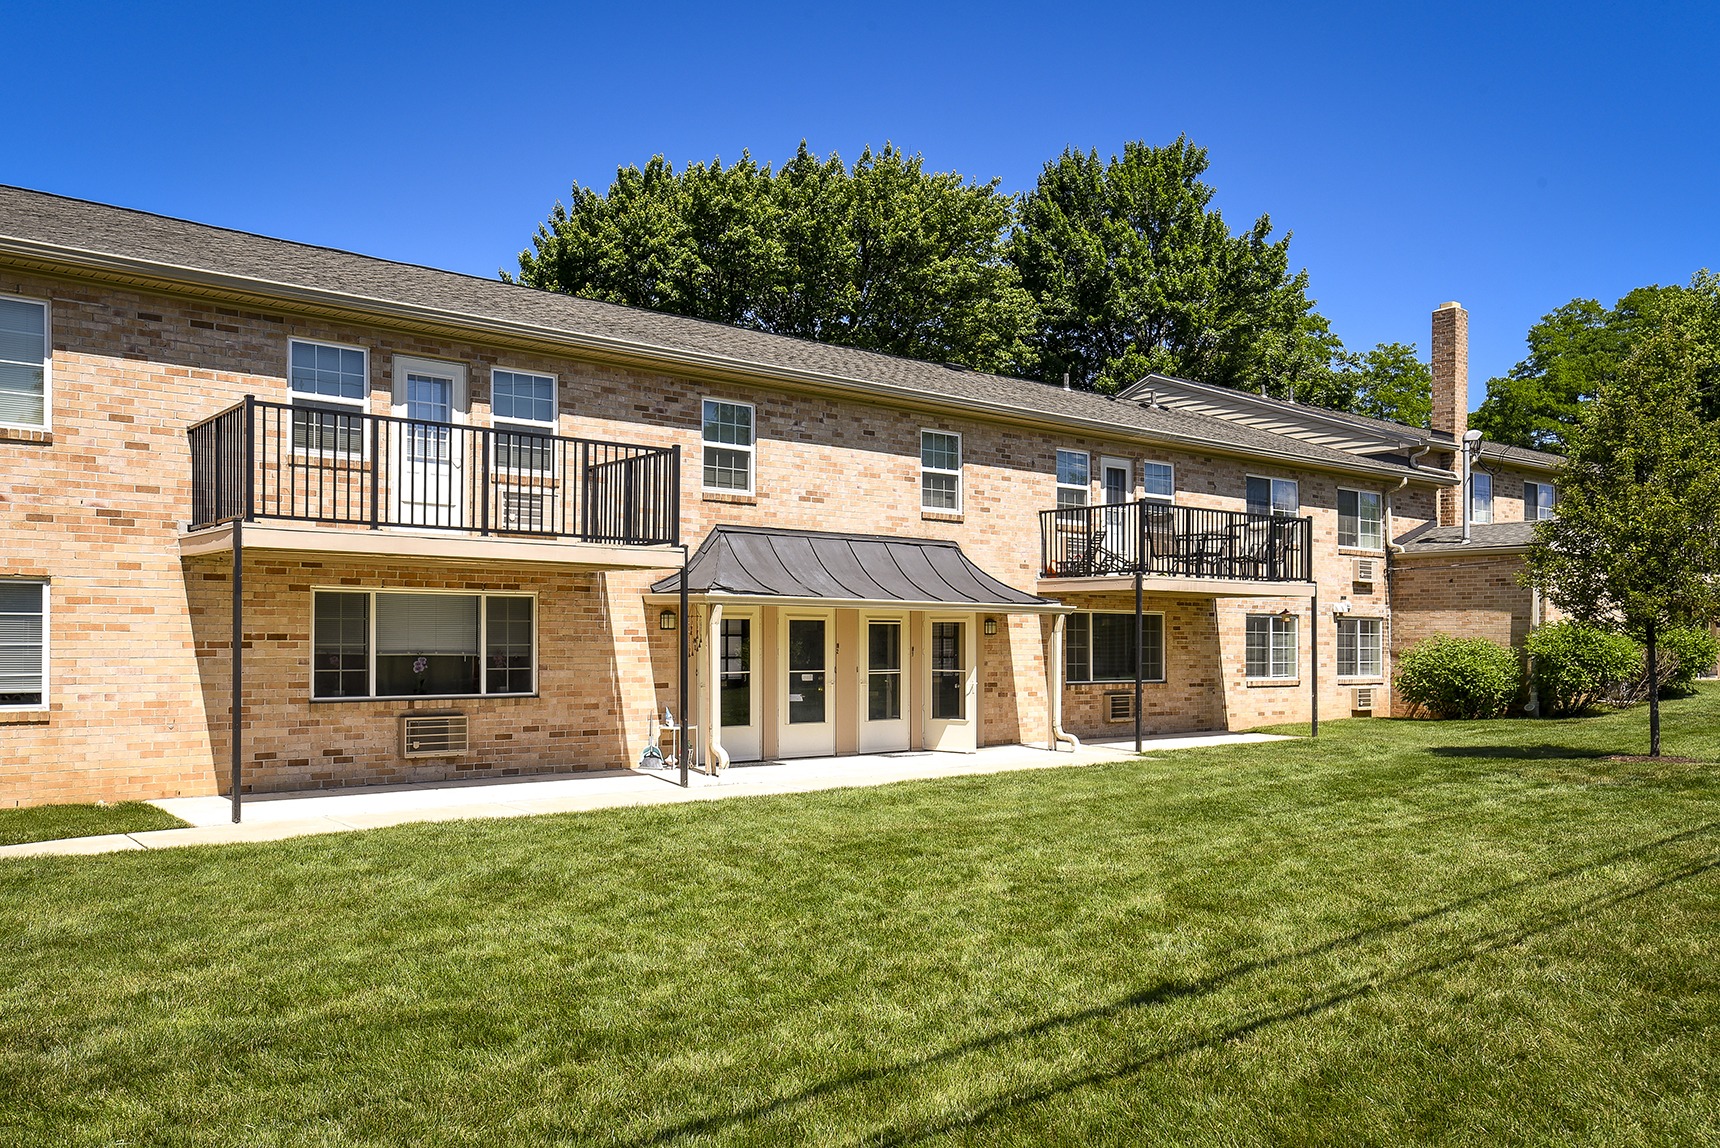 Woodland Plaza Wyomissing apartment building with a large lawn in front